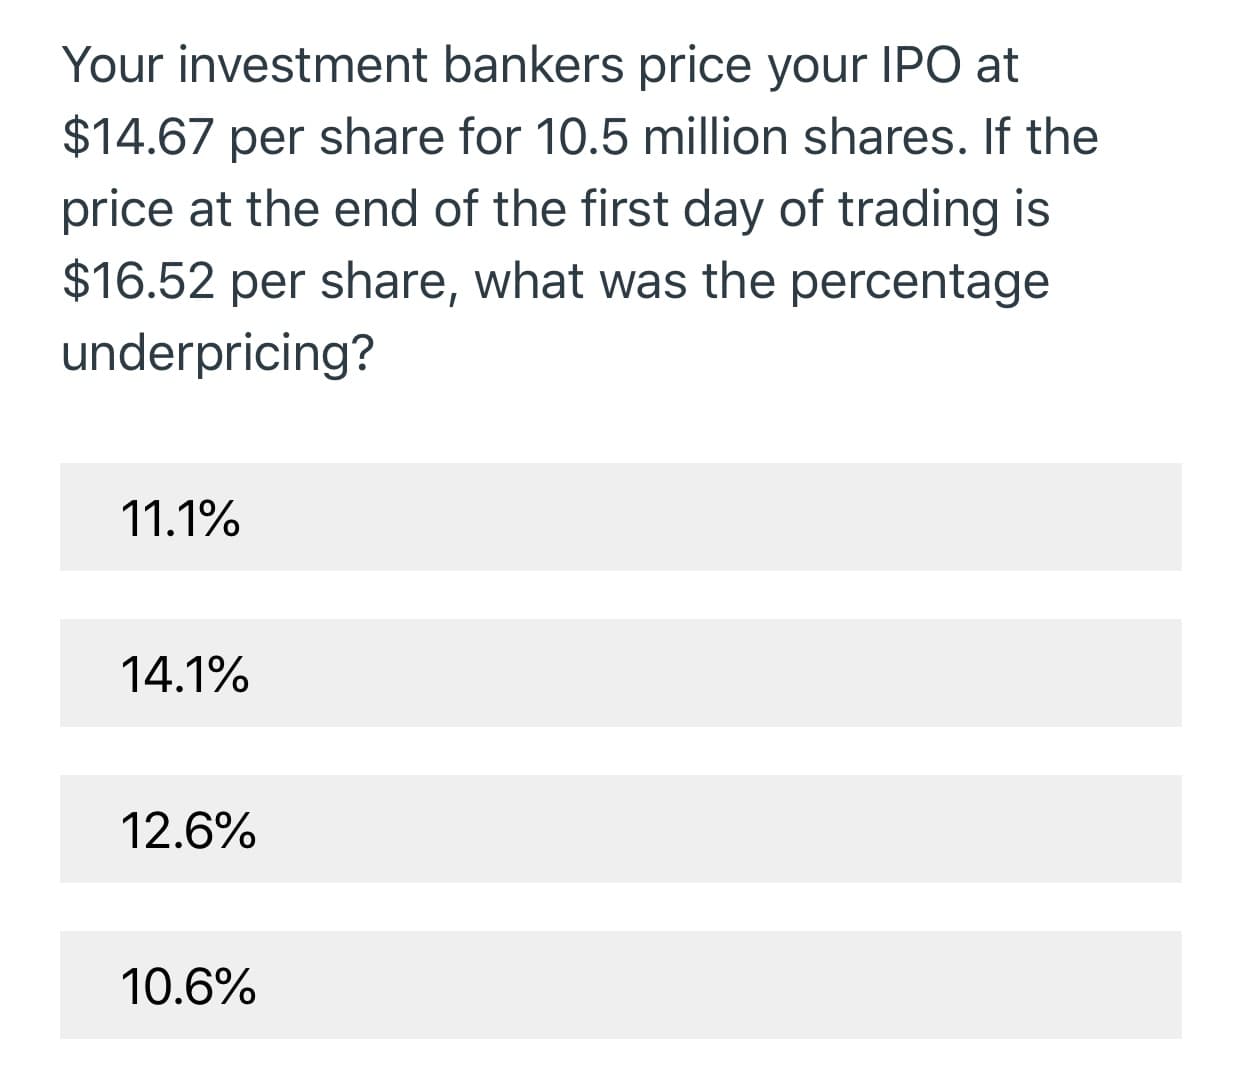 Your investment bankers price your IPO at
$14.67 per share for 10.5 million shares. If the
price at the end of the first day of trading is
$16.52 per share, what was the percentage
underpricing?
11.1%
14.1%
12.6%
10.6%
